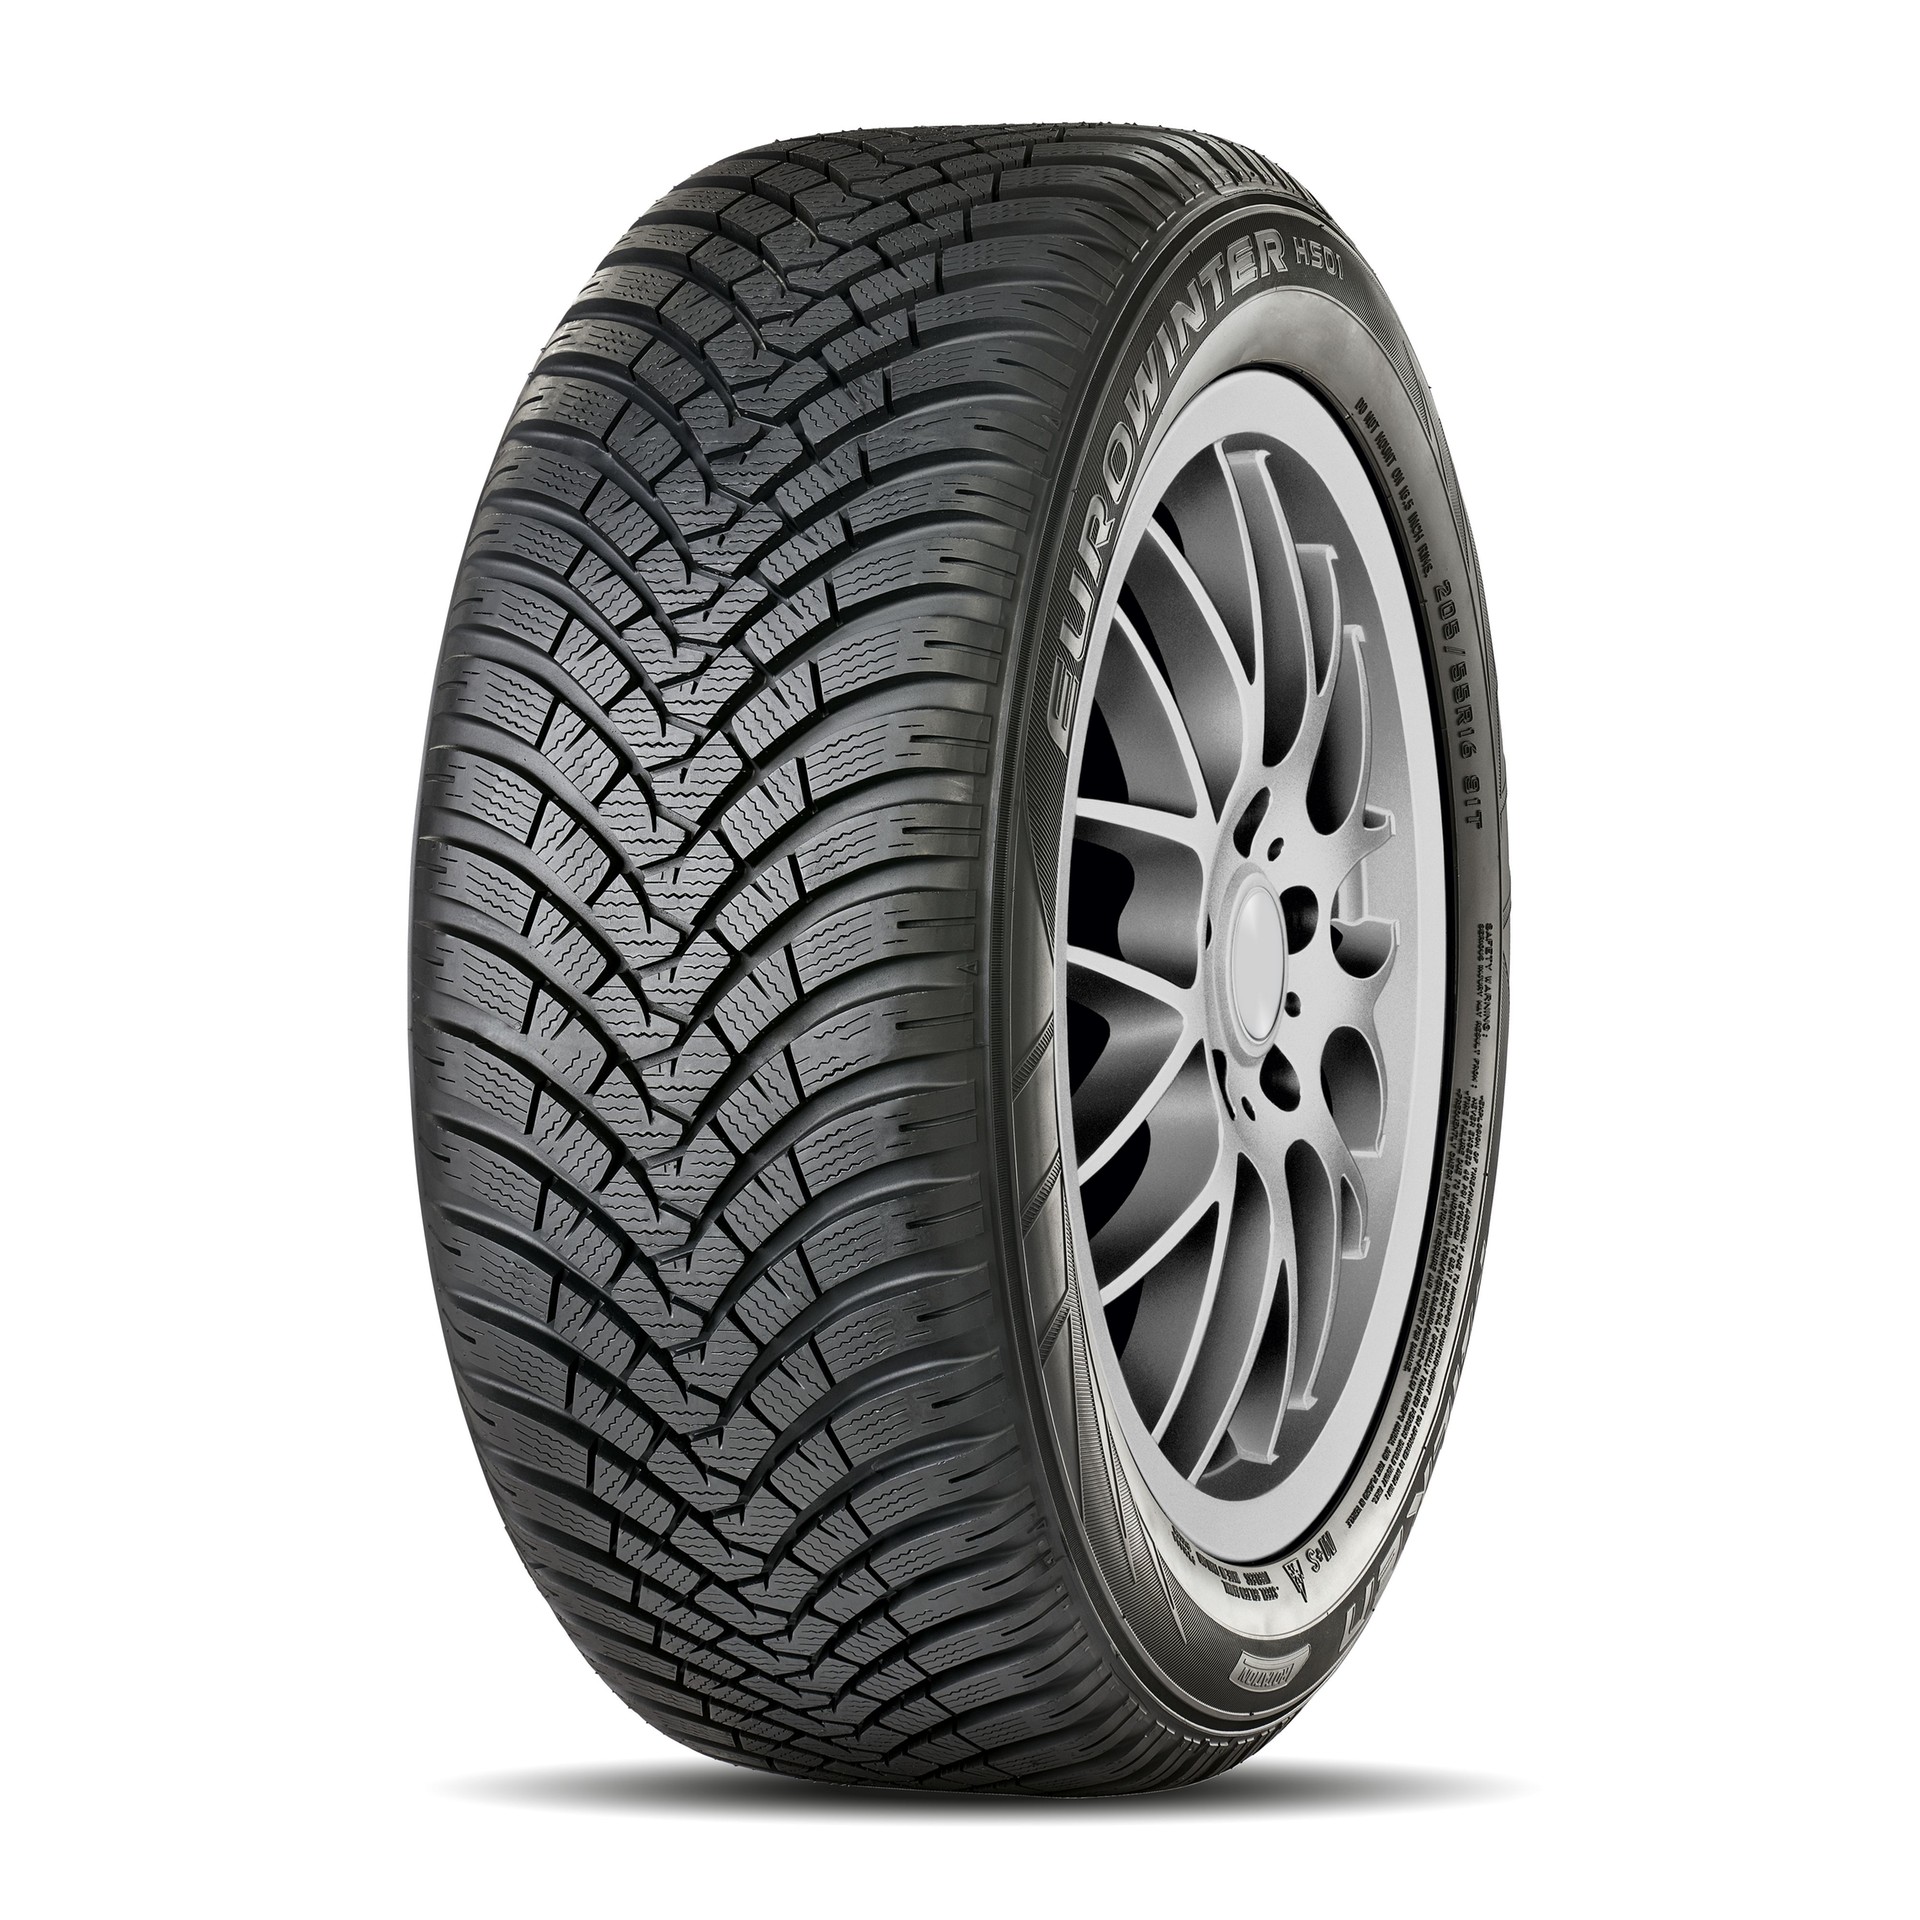 Tests Reviews and Tire - HS01 Eurowinter Falken